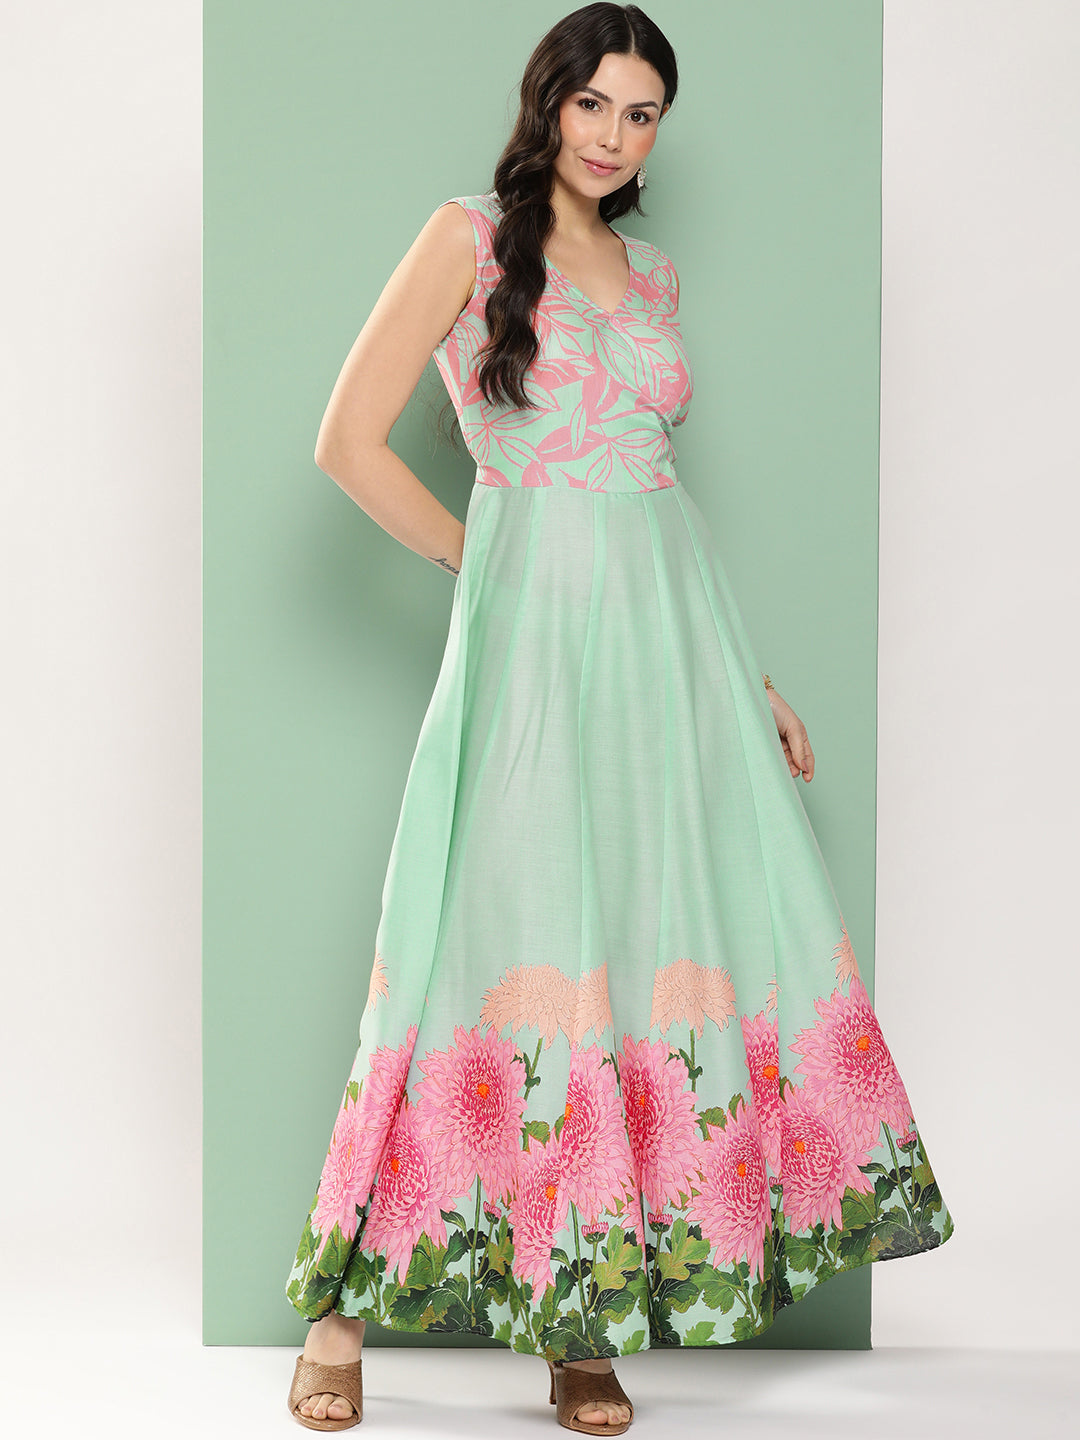 Bhama Couture Turquoise Blue Printed Long Dress With V-Neck